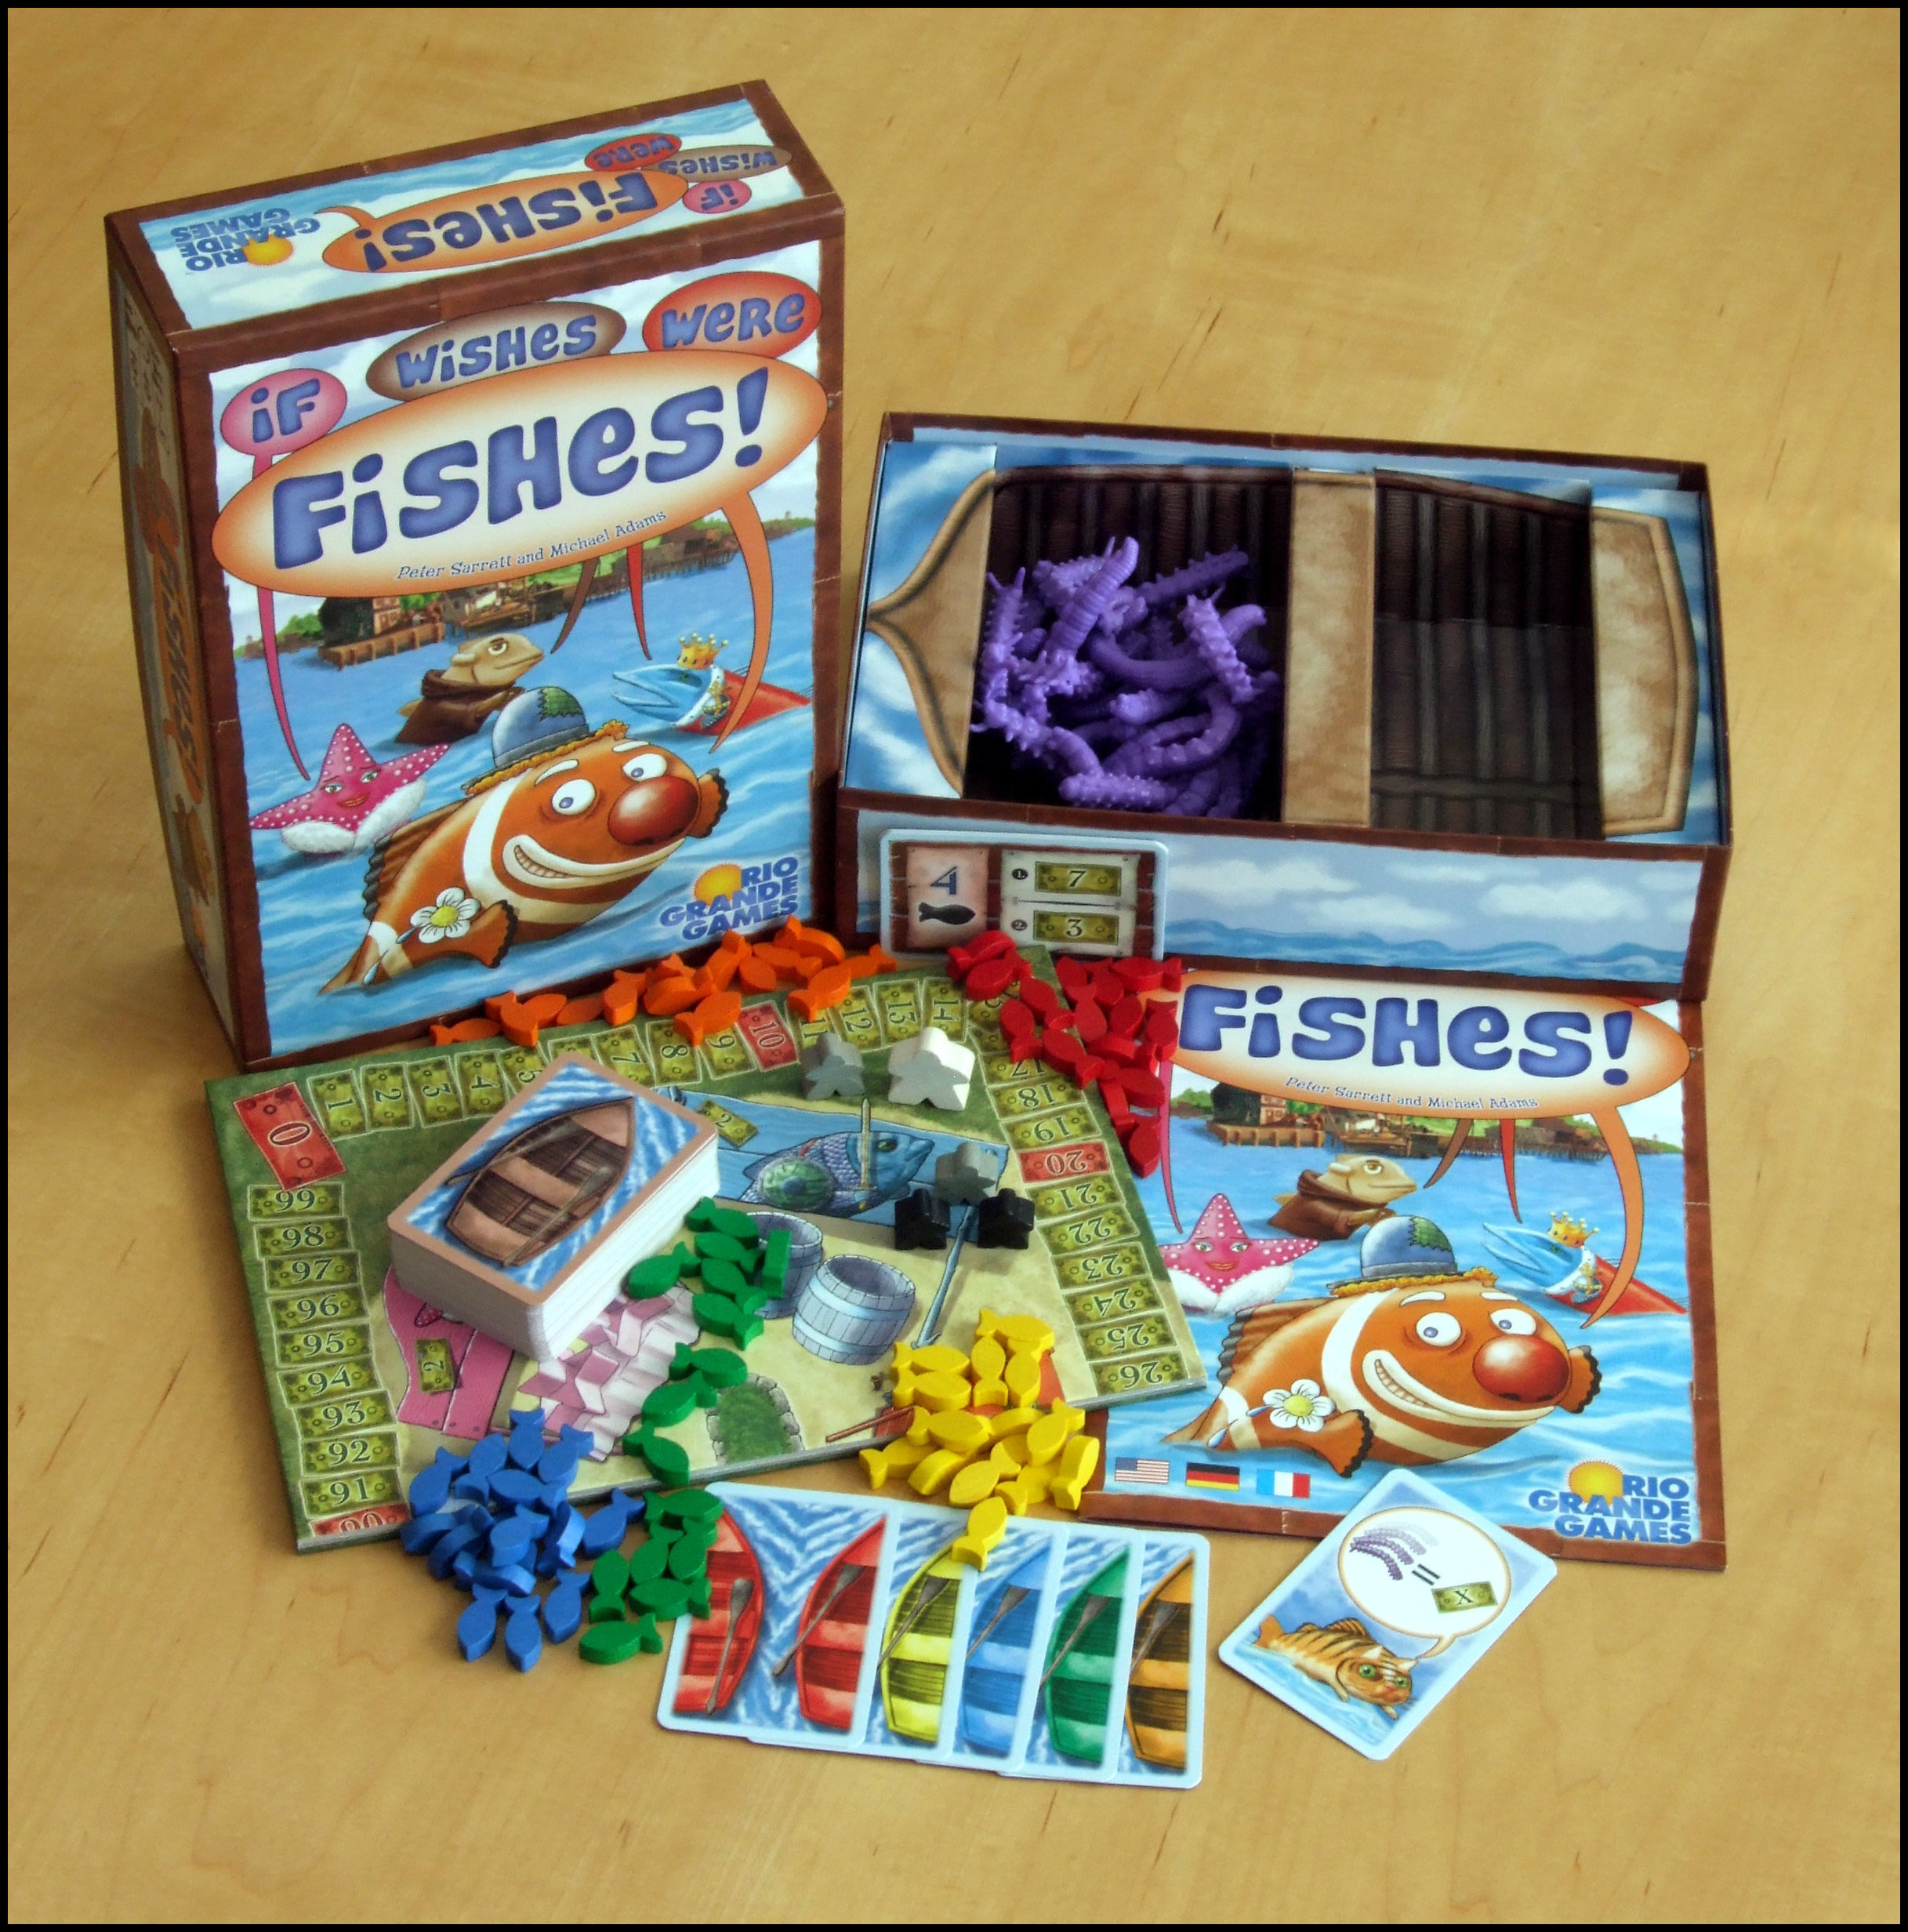 If Wishes Were Fishes! - Box Contents